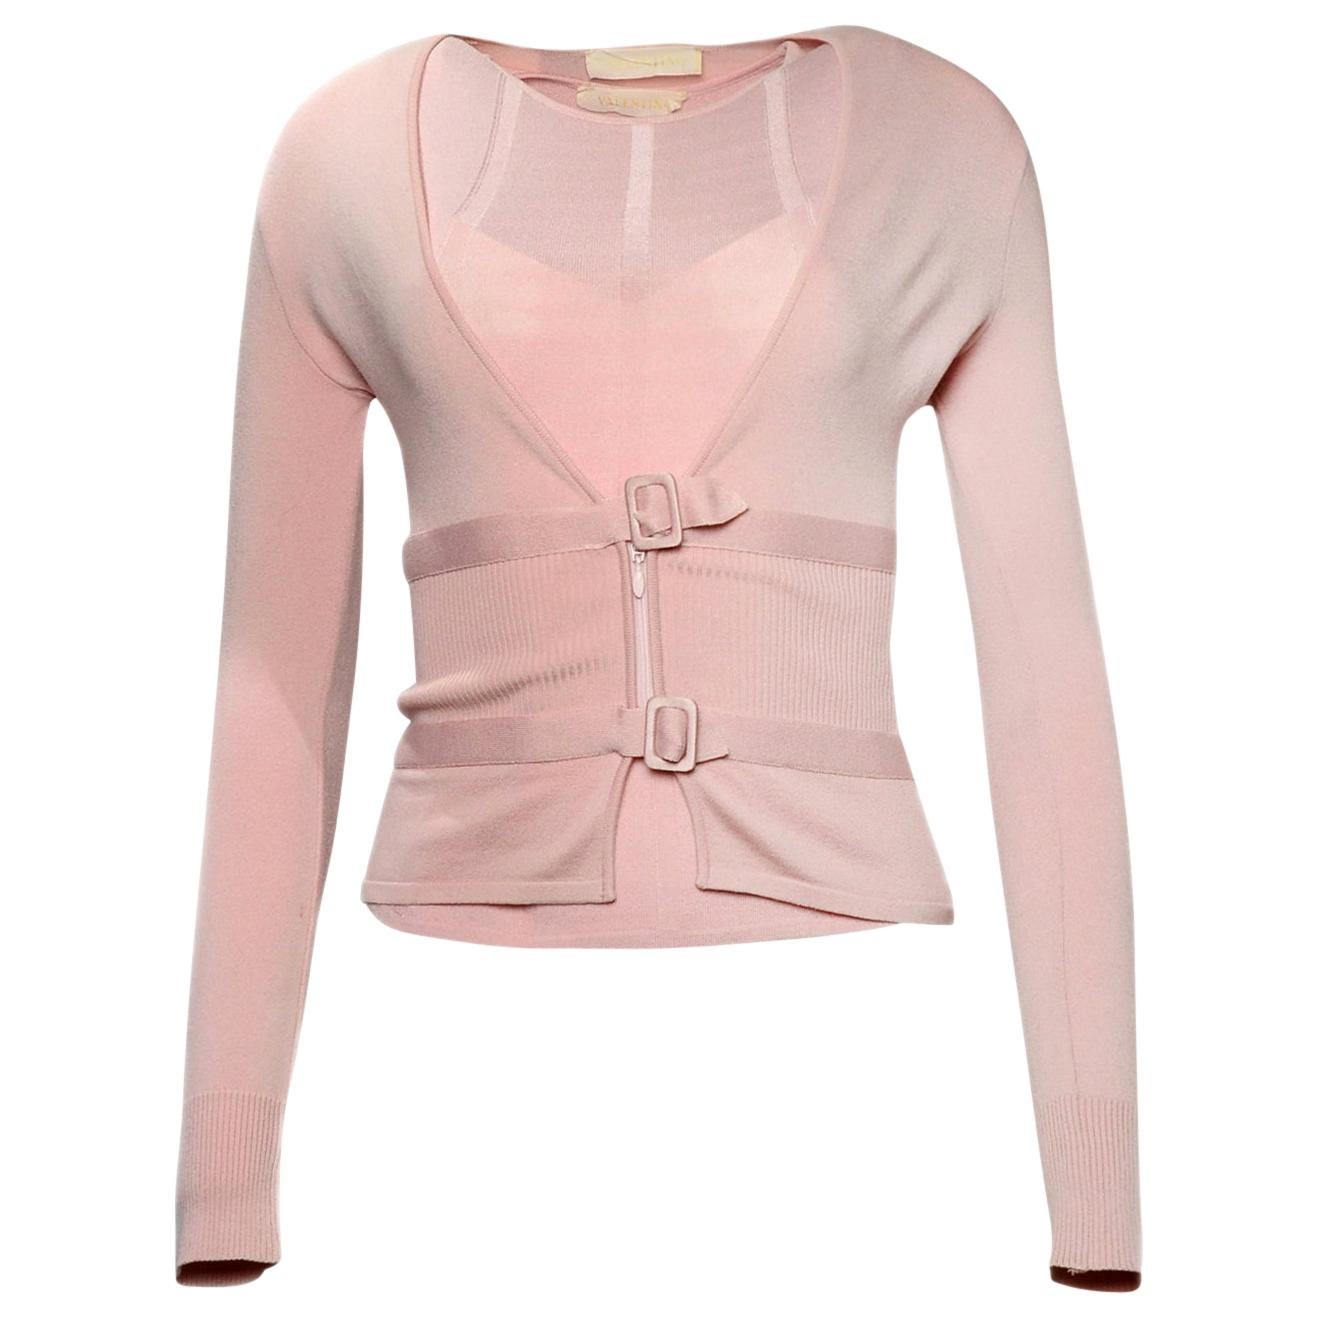 Valentino Pink Sweater Set w/ Buckle Detail sz Small